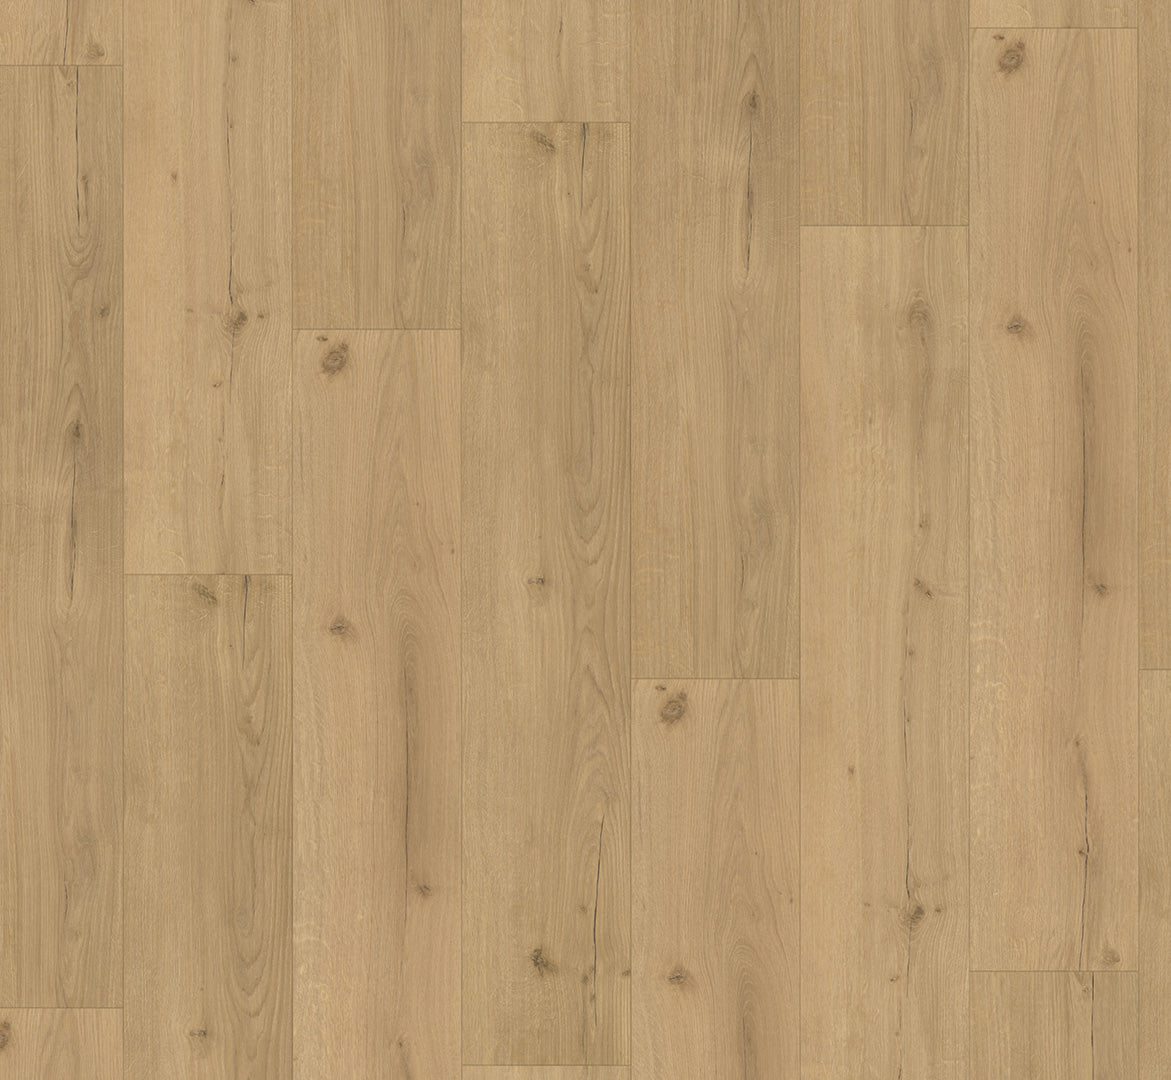 Oak Infinity Natural - Basic 5.3 SPC 4V Class 32 Wide Plank (Commercial)